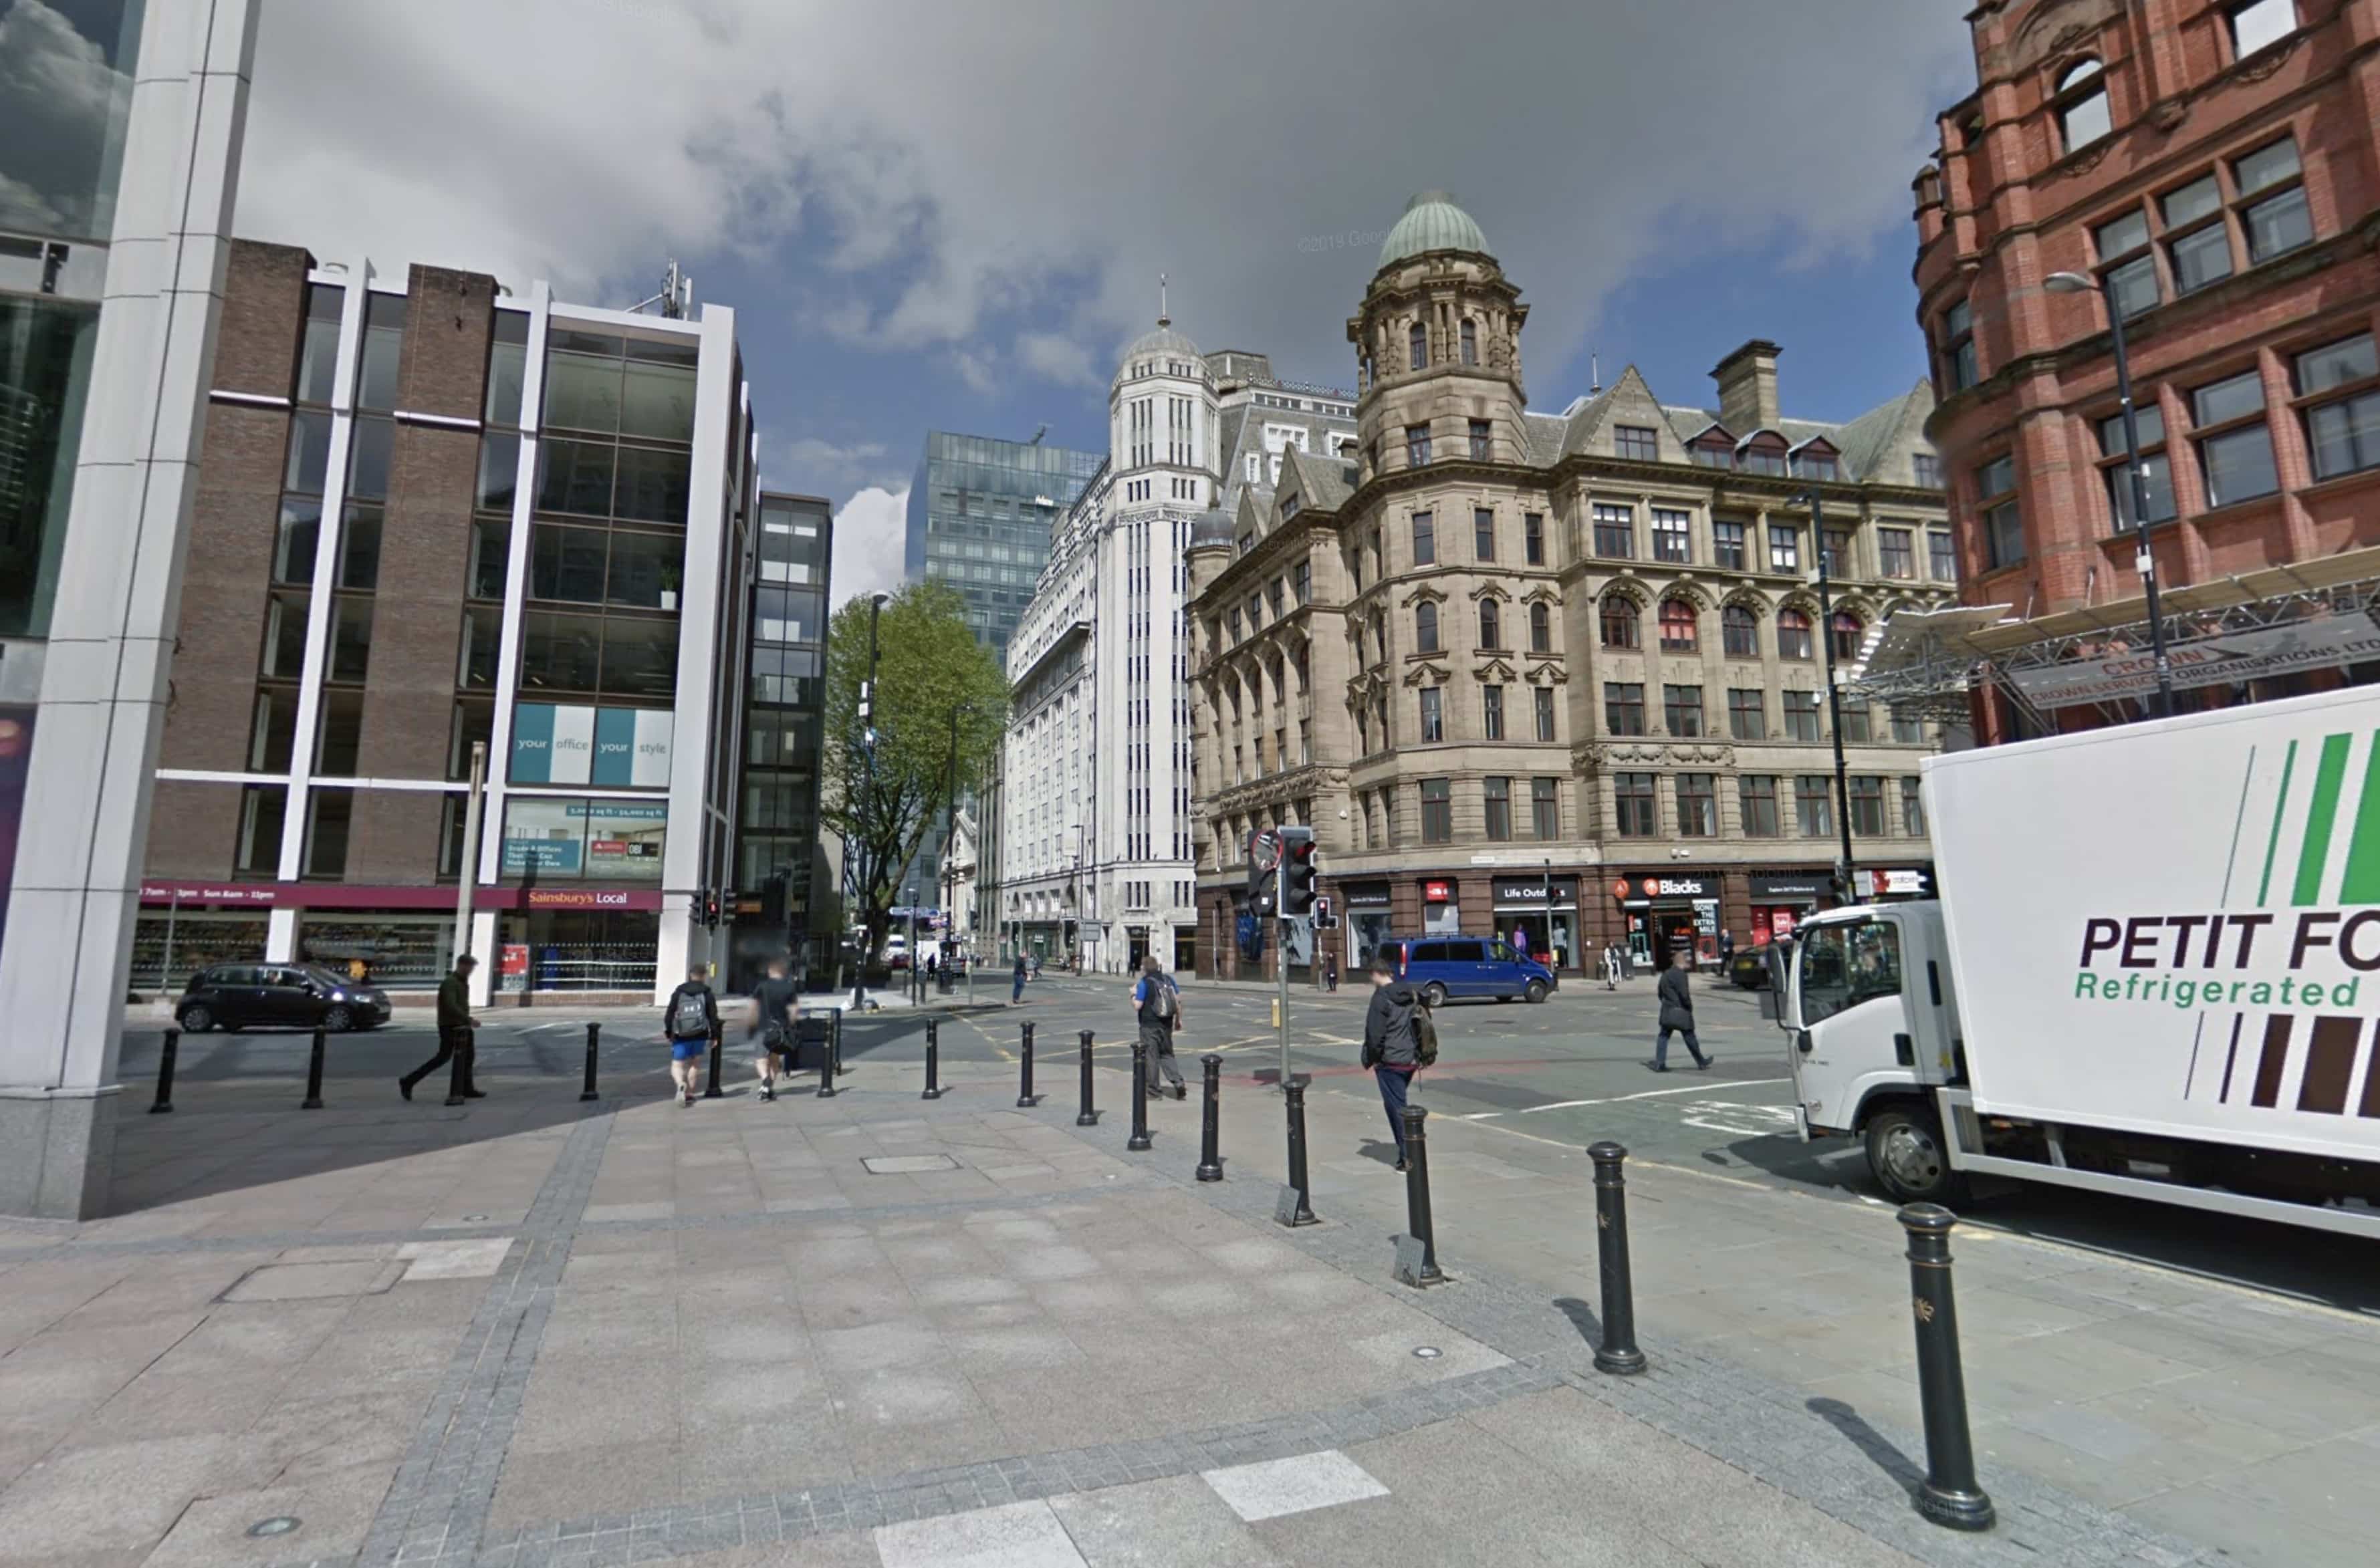 Great Northern Square in Manchester. <span class="figure--credit">Photo from [Google Maps](https://goo.gl/maps/KRDMbs3AbfqrQuqe8)</span>